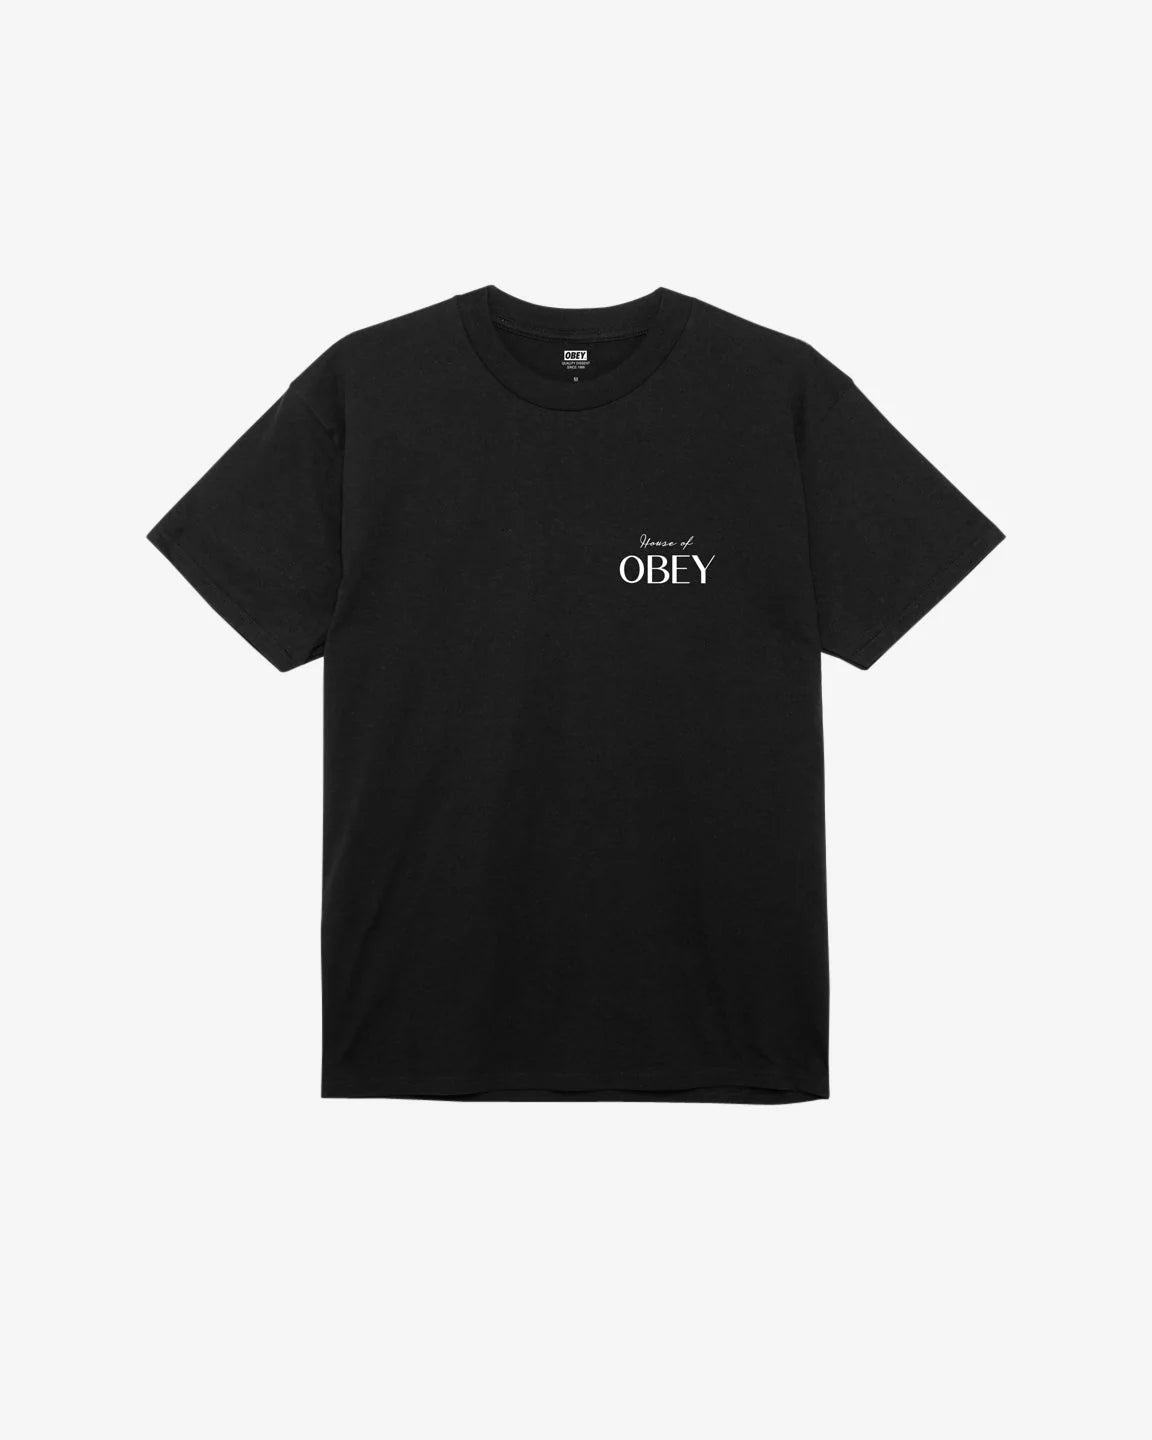 OBEY HOUSE OF OBEY CLASSIC T-SHIRT - Black